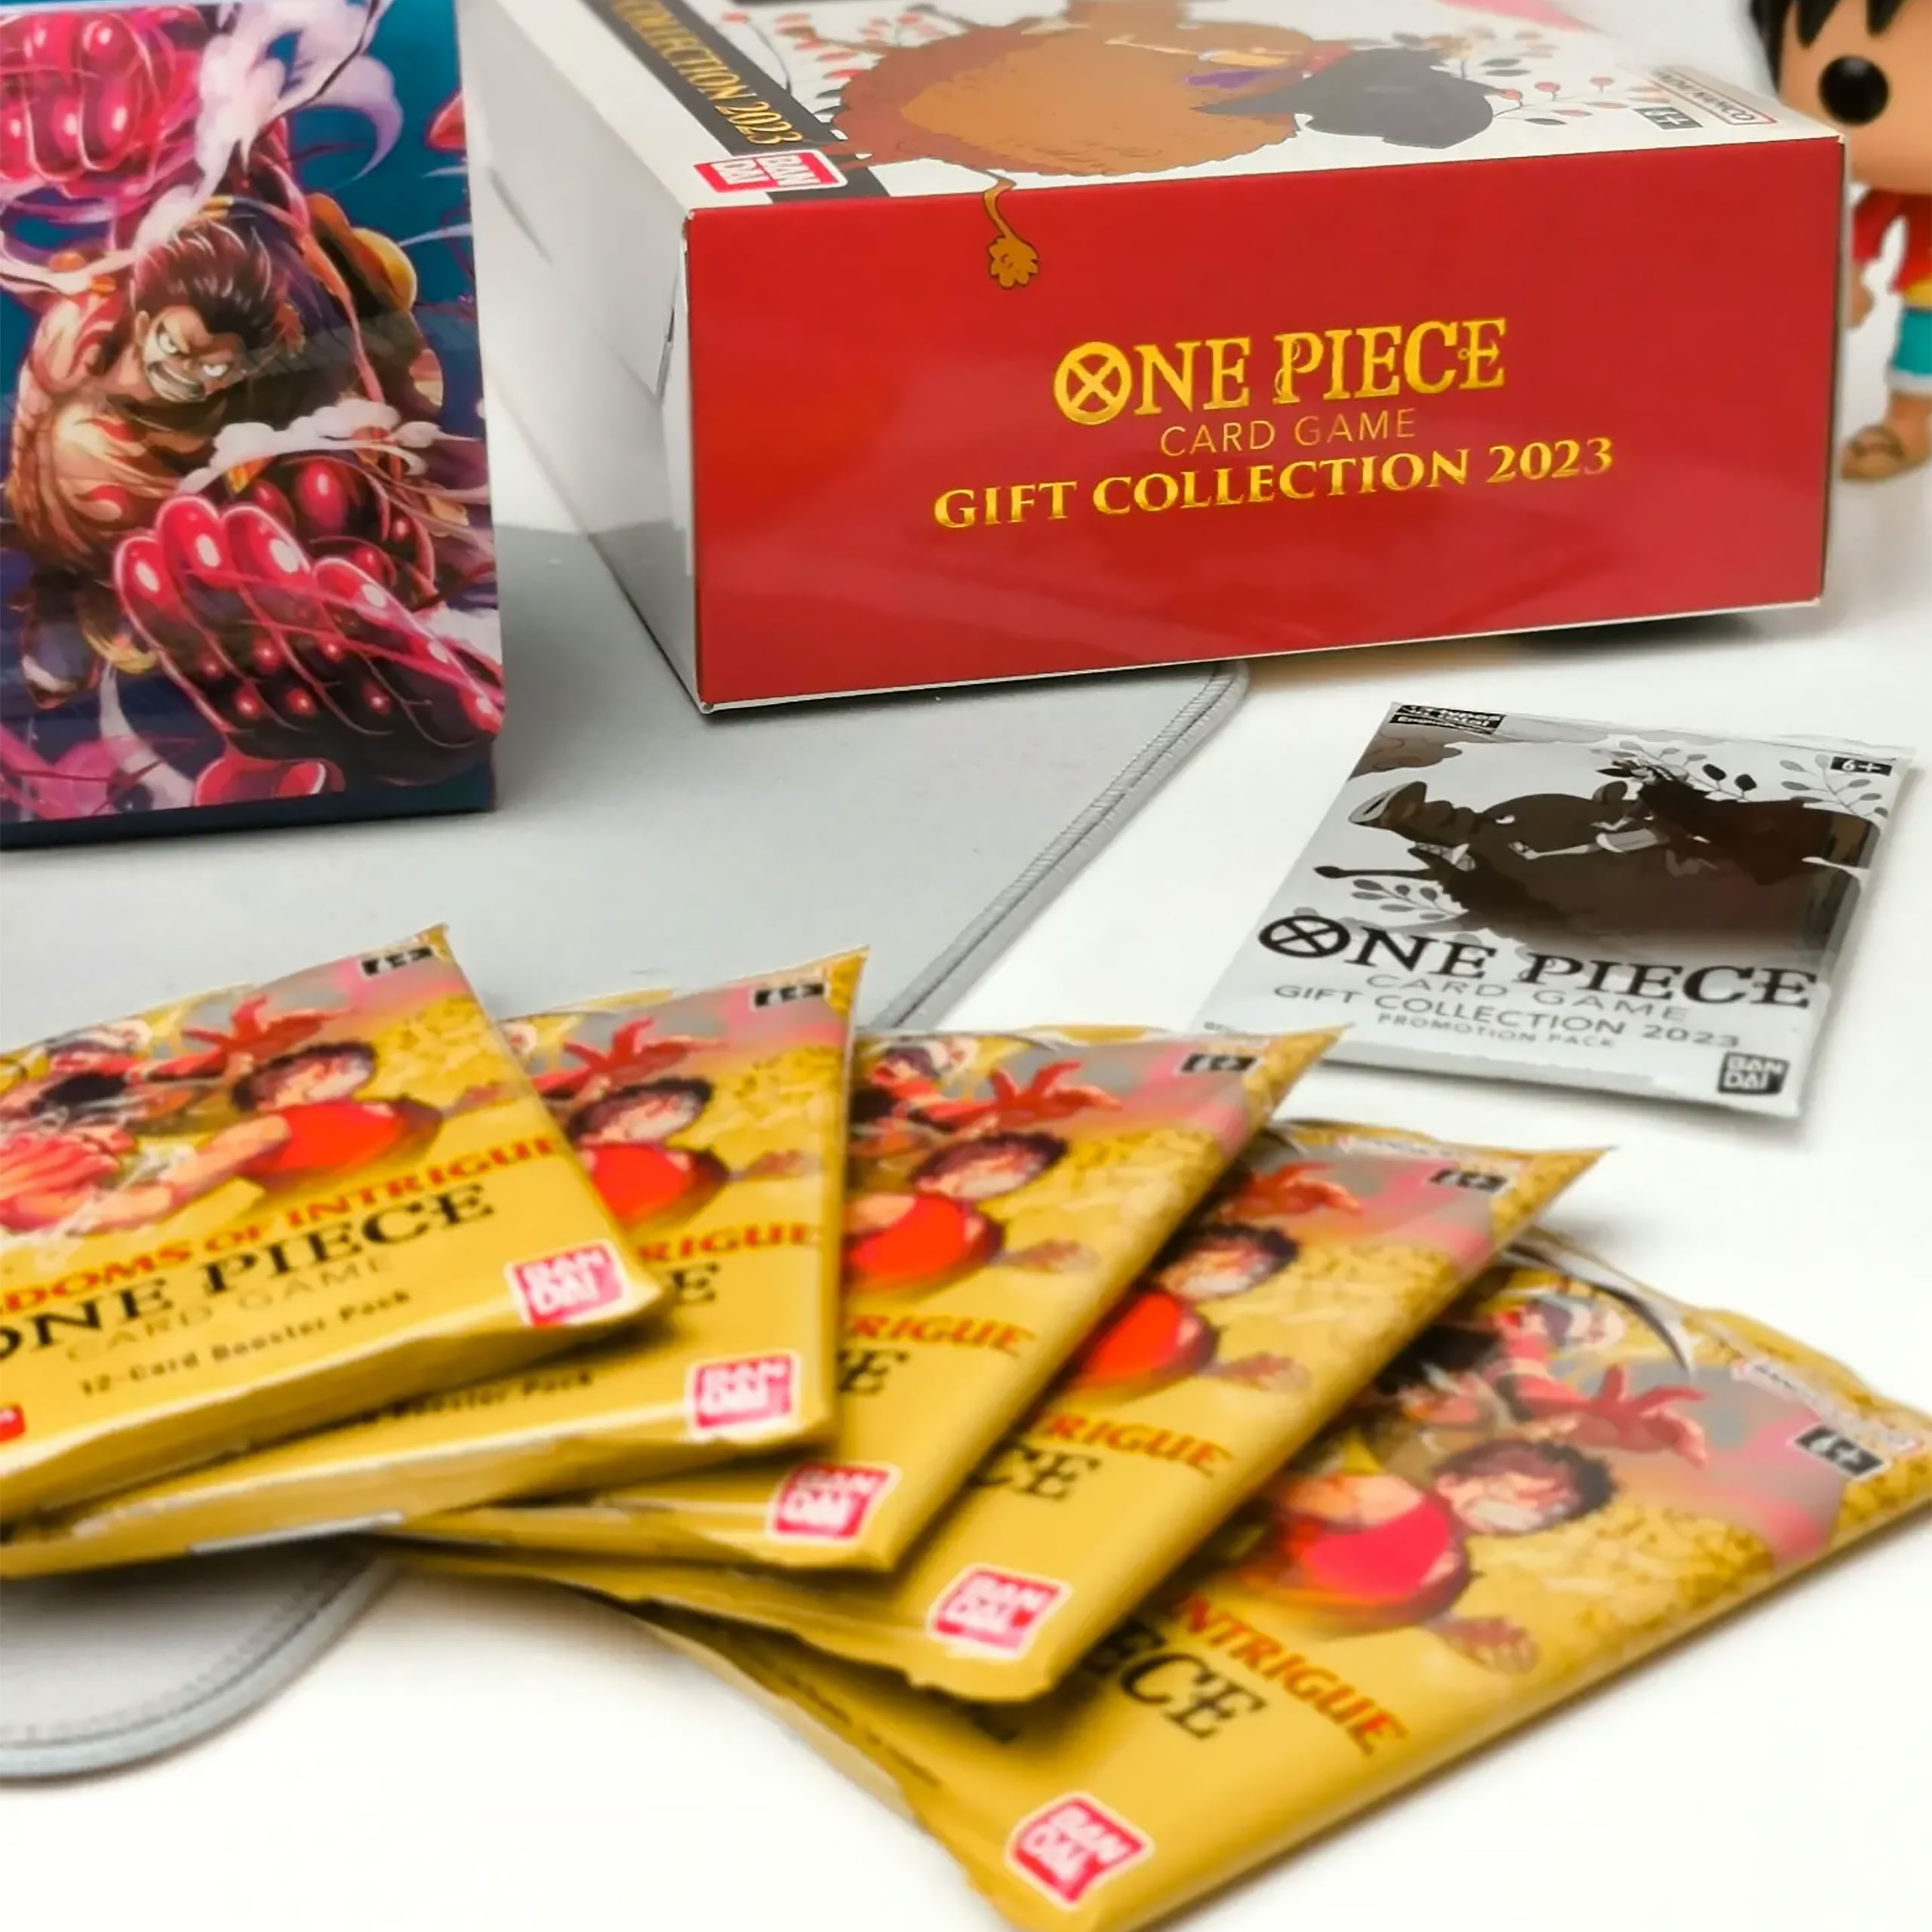 One Piece Card Game - Gift Collection 2023 Engelse Versie